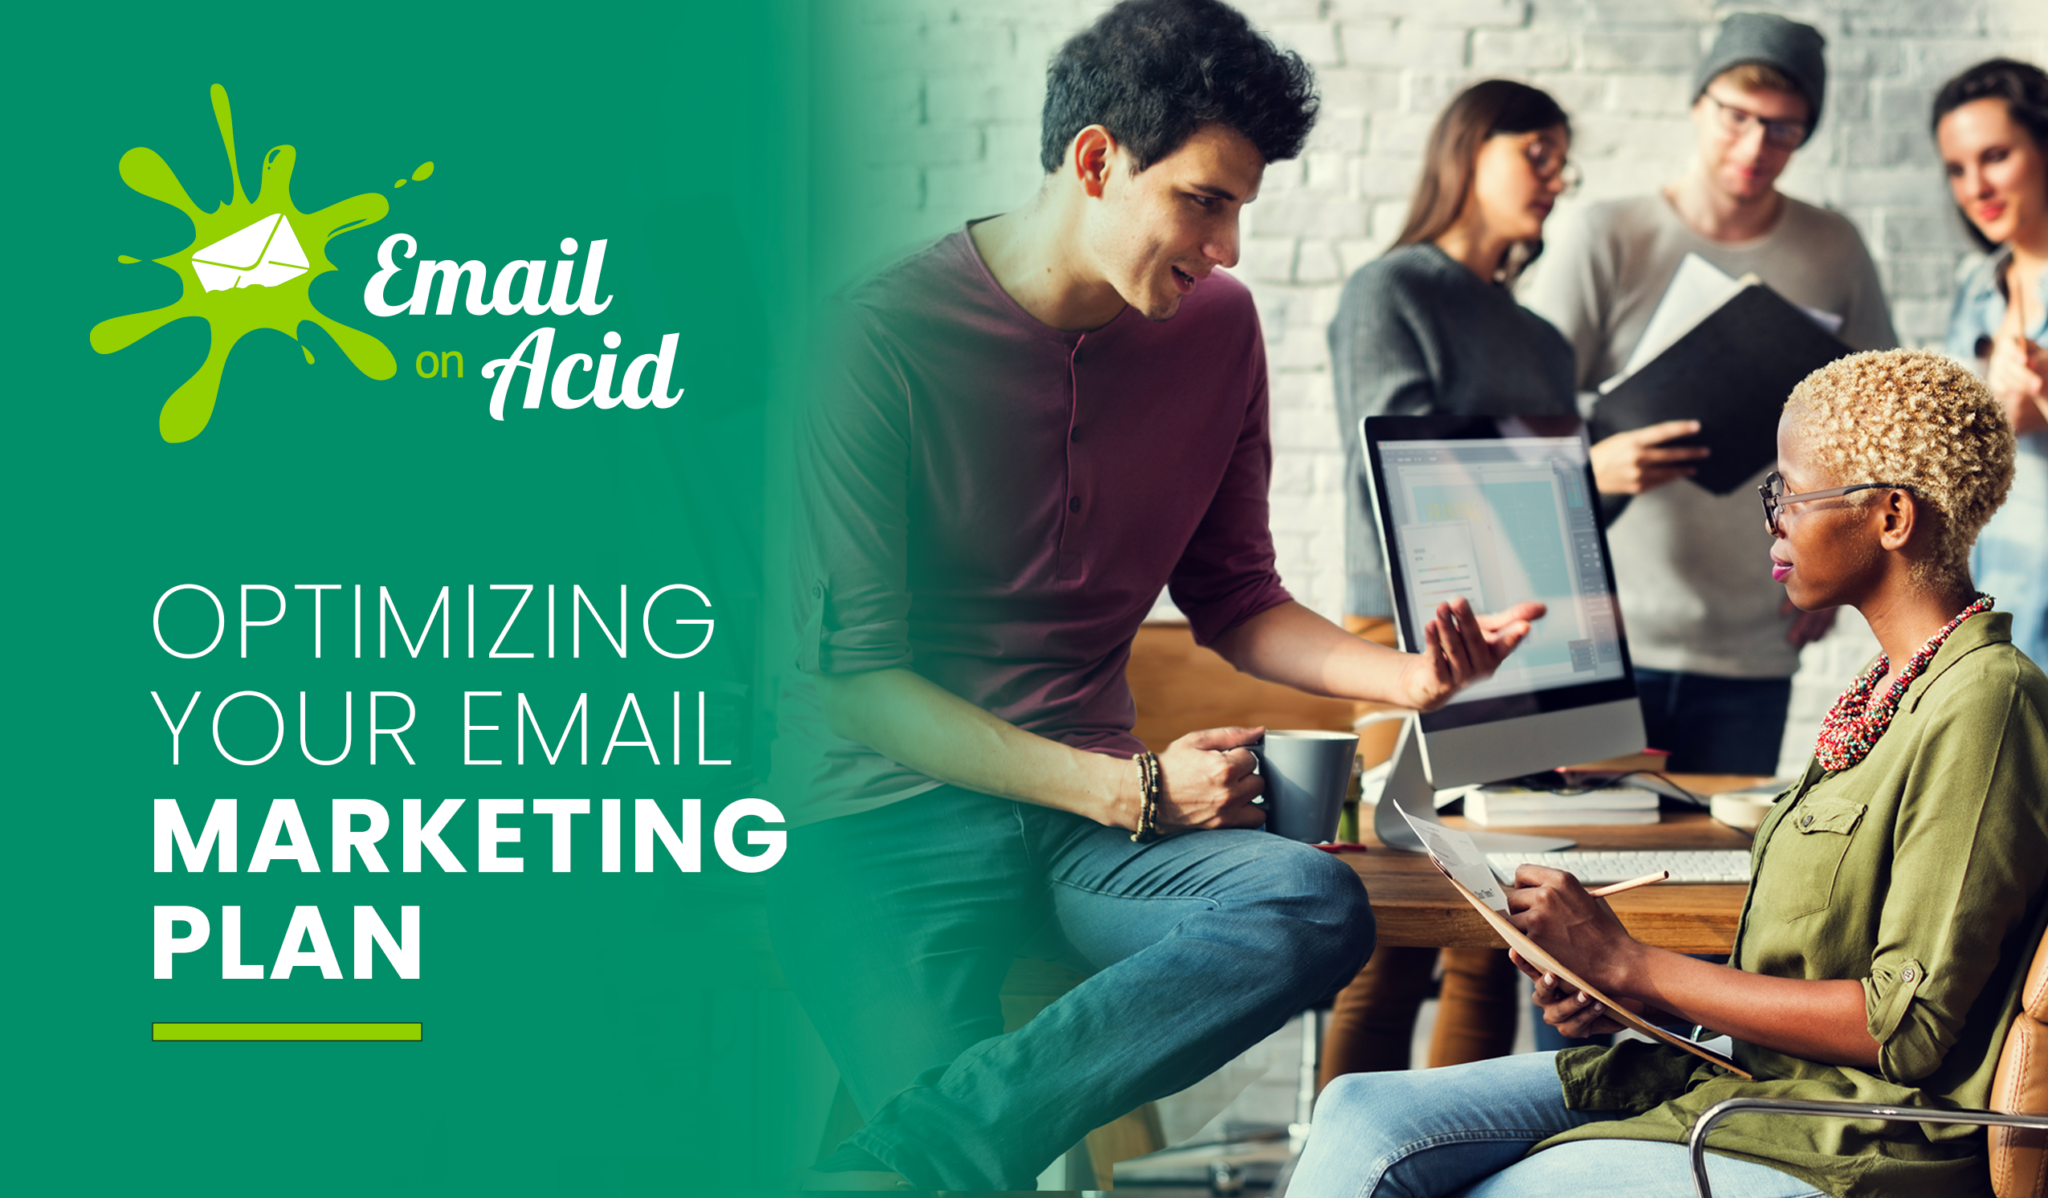 Colleagues discuss email marketing optimization.